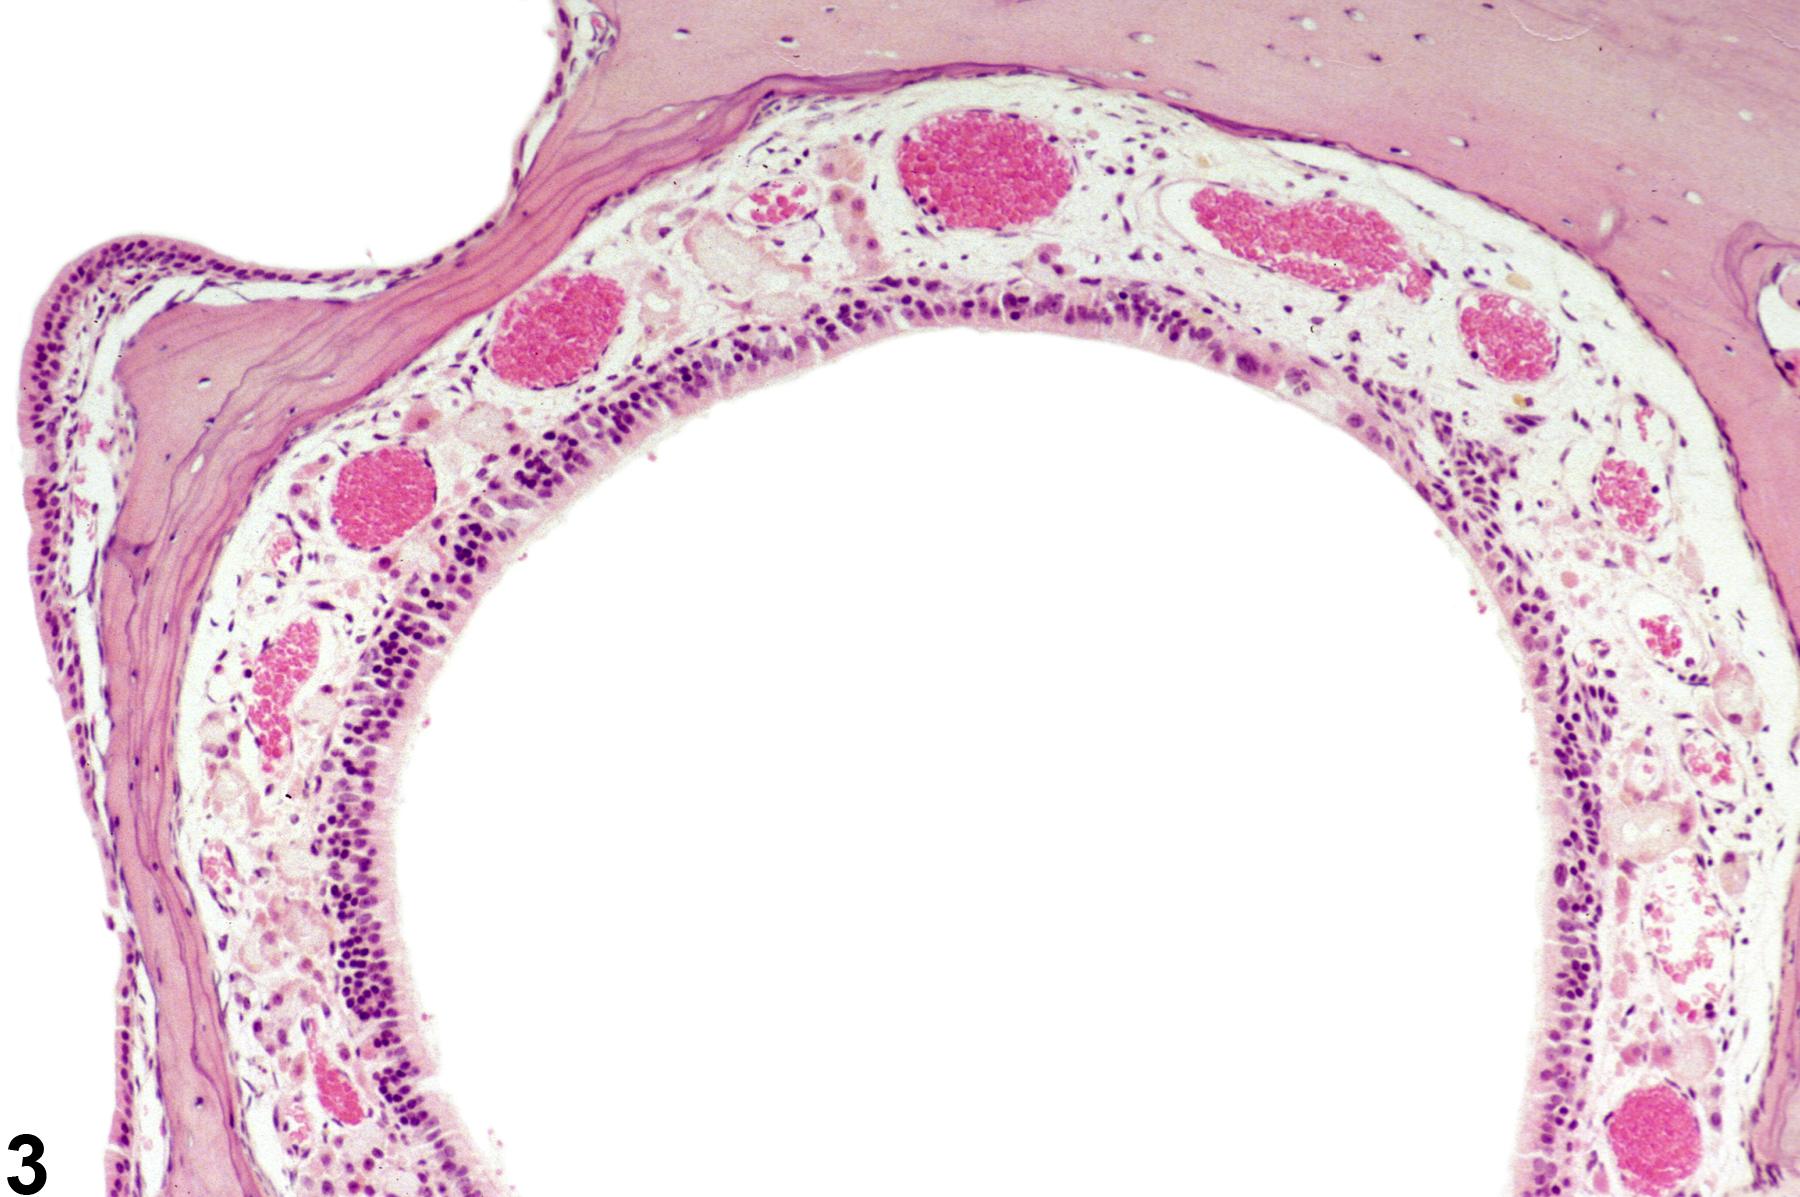 Image of atrophy in the nose from a male B6C3F1/N mouse in a chronic study